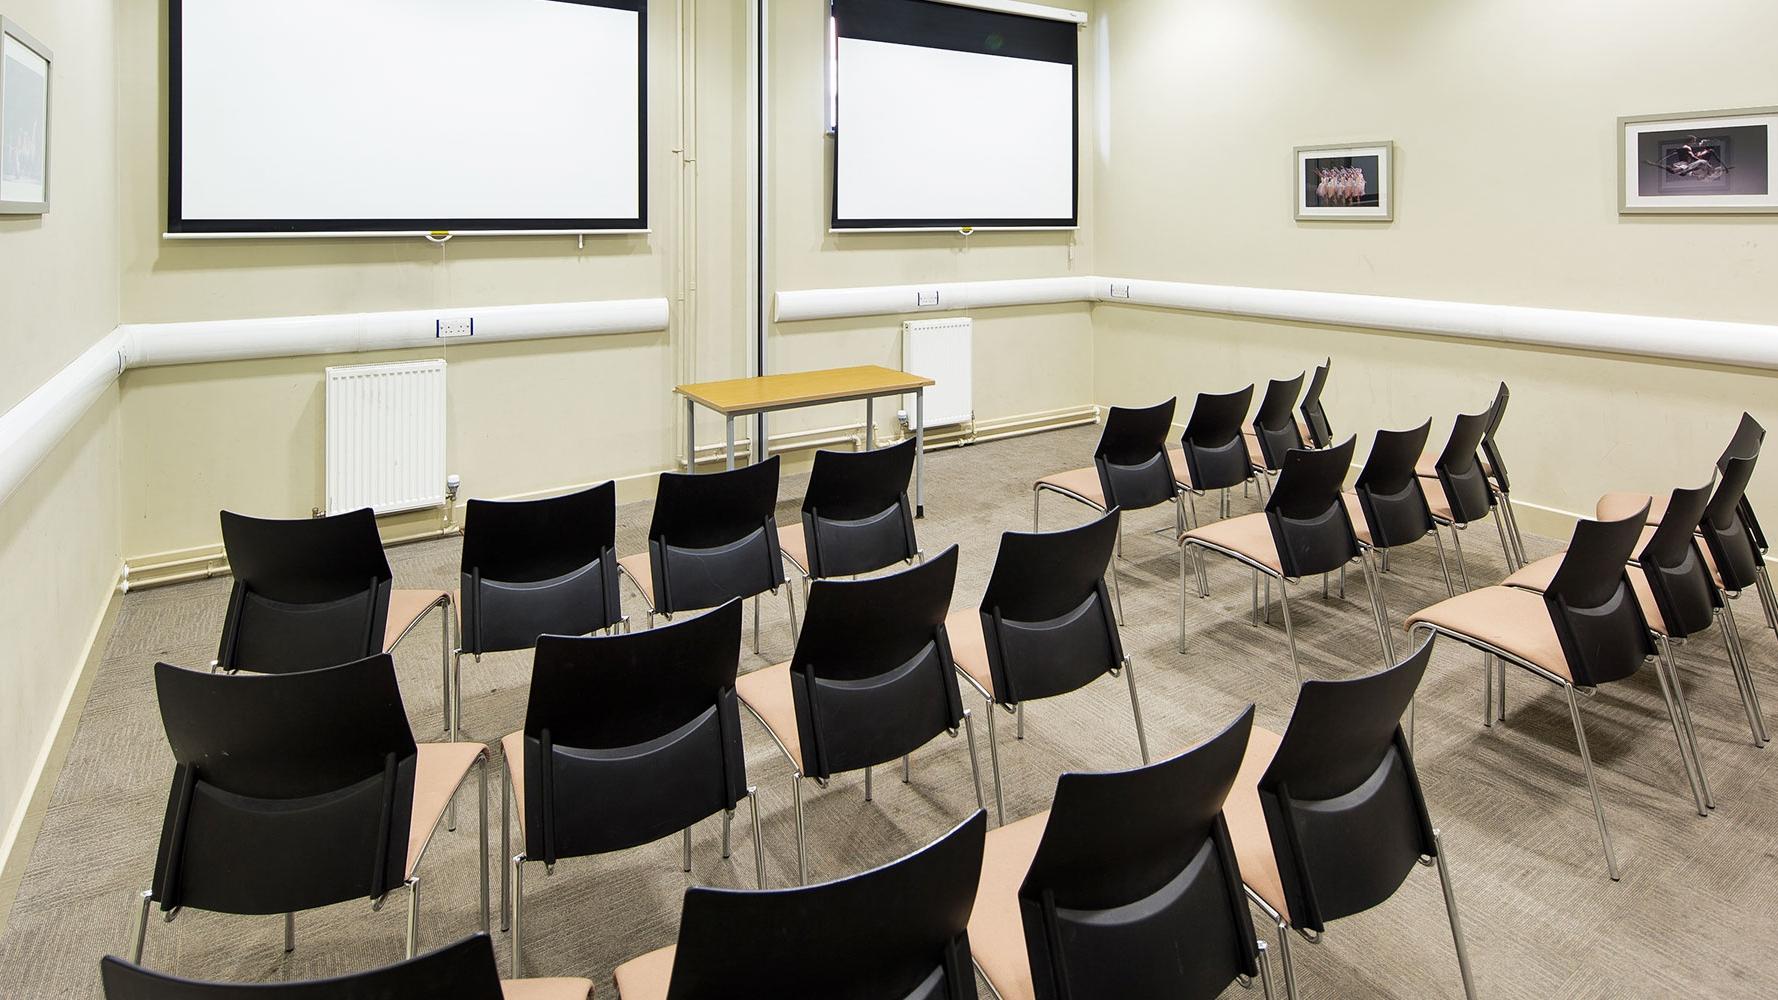 Find your Conference Venue in Leeds, UK